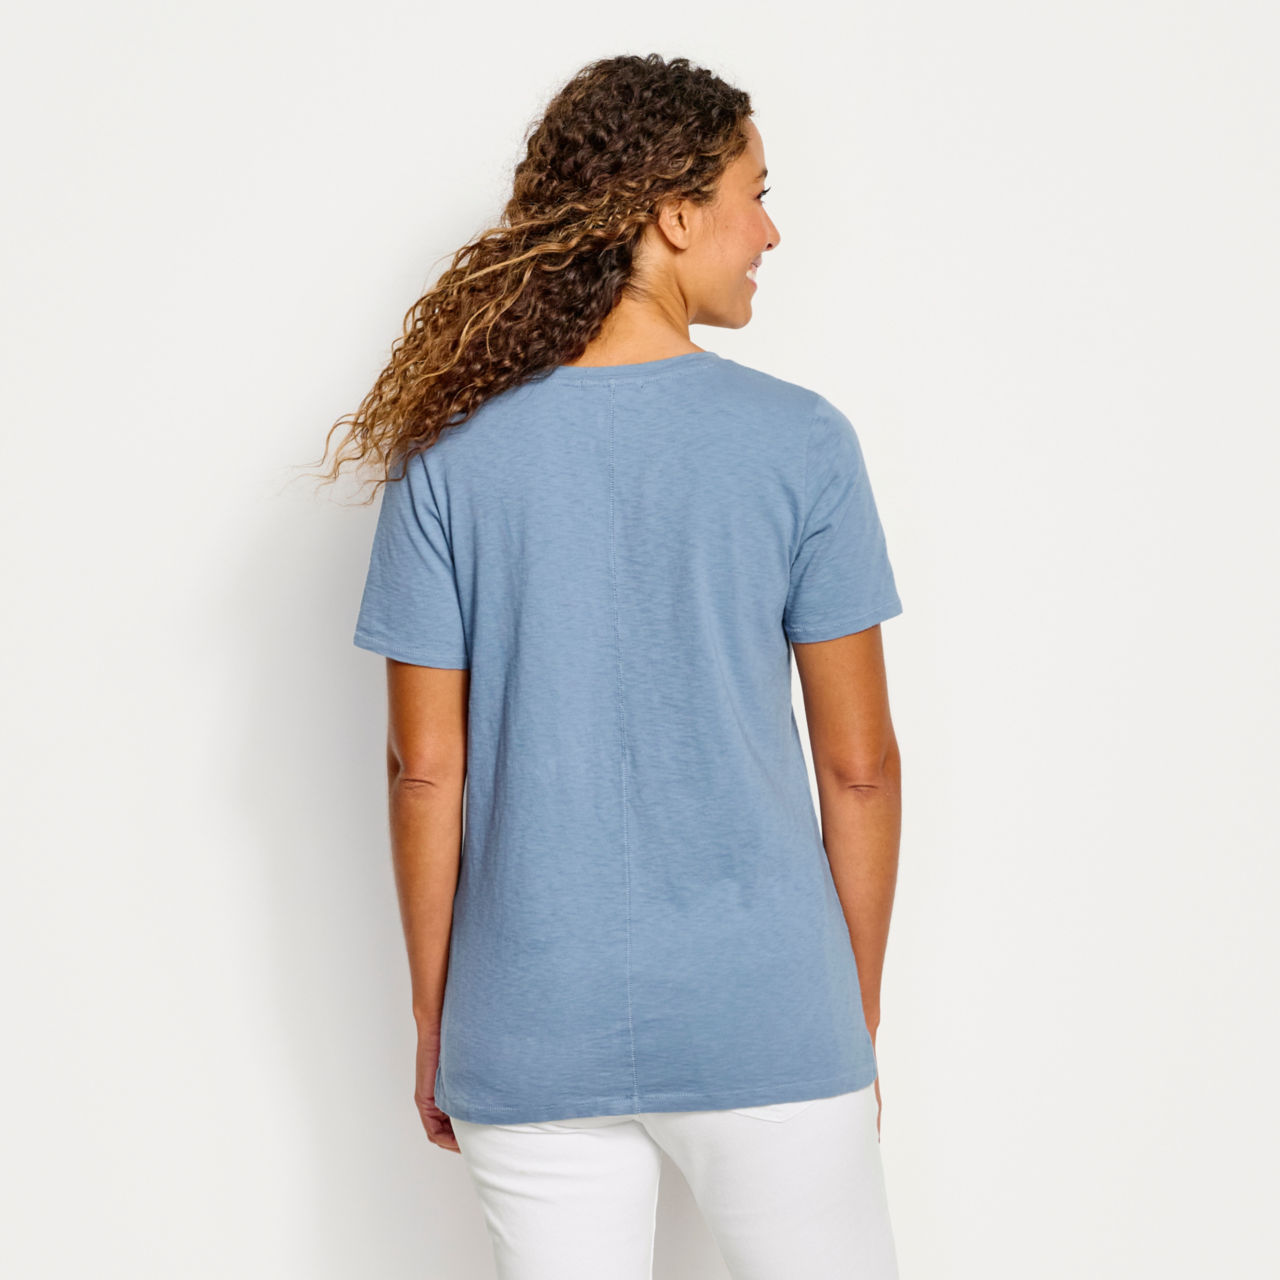 Canyon Garment-Dyed V-Neck Short-Sleeved Tee - DUSTY BLUE image number 3